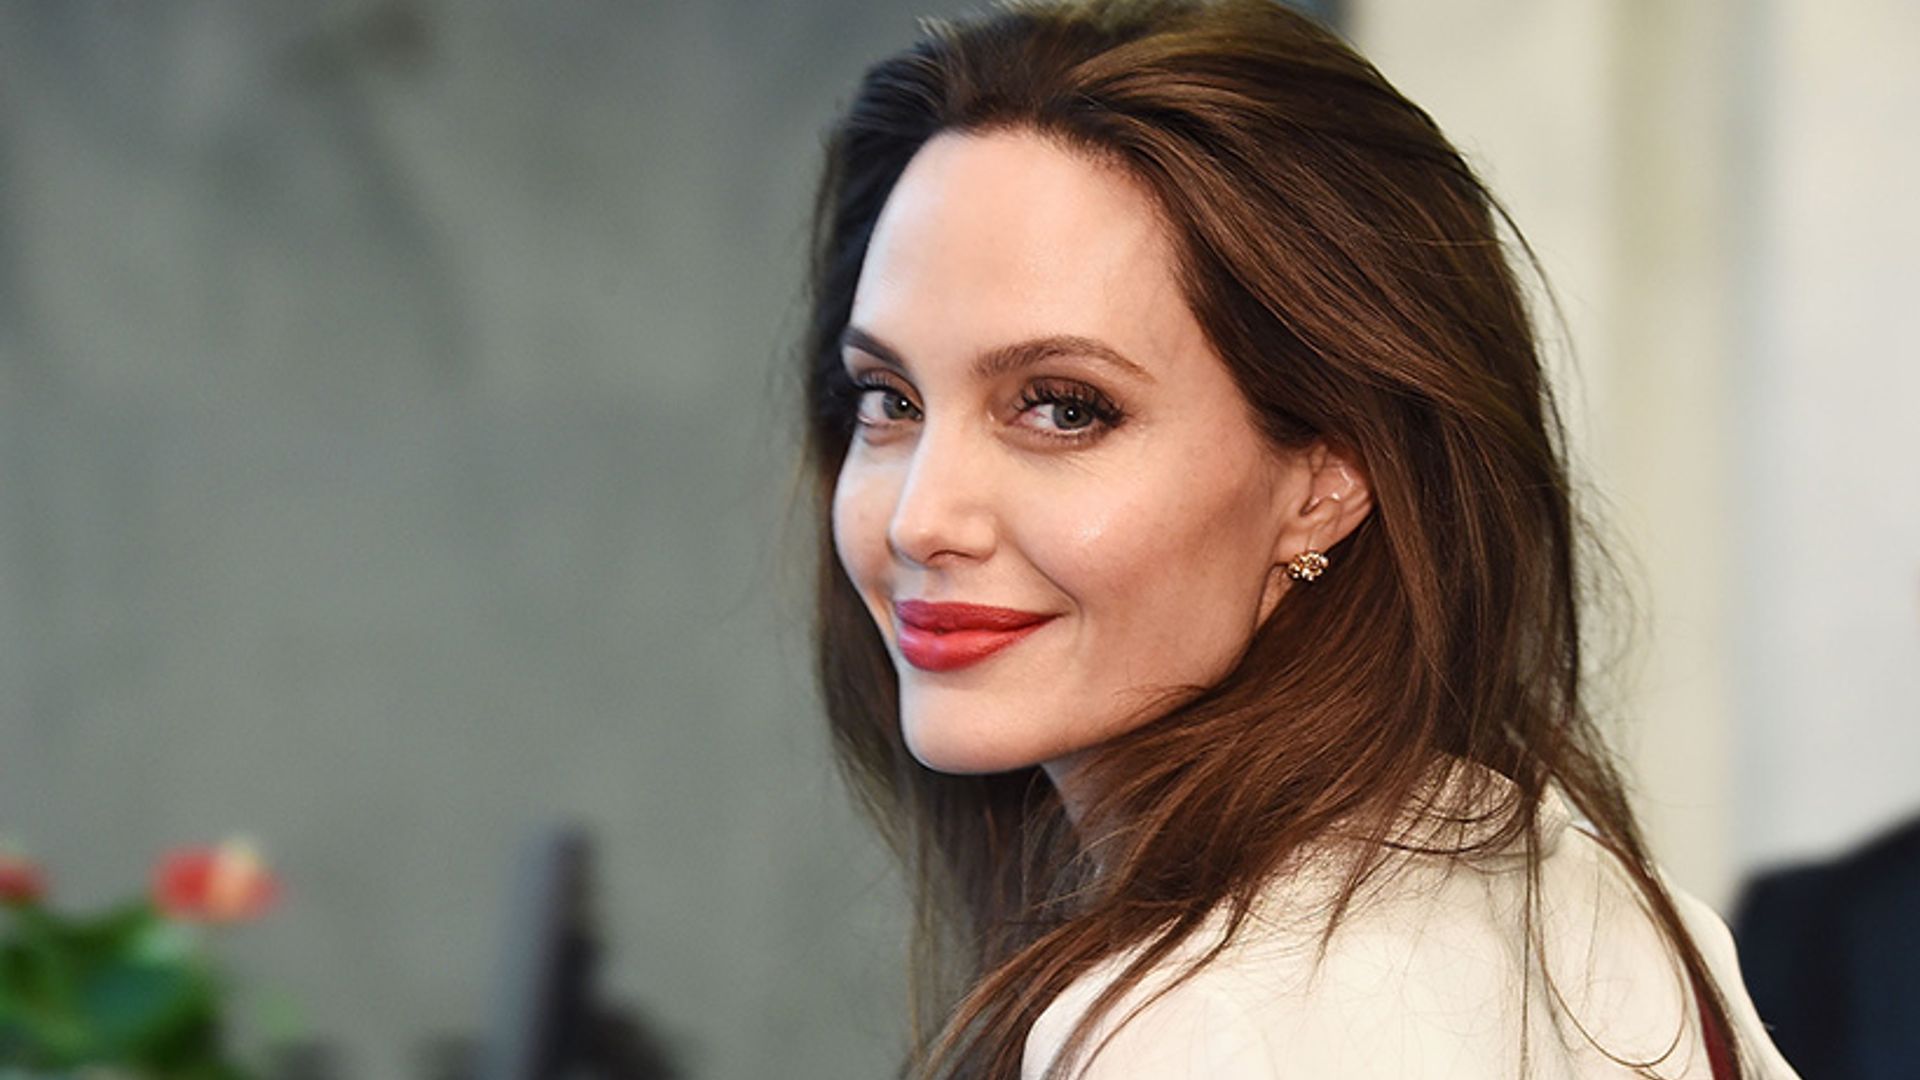 What is Angelina Jolie's net worth?